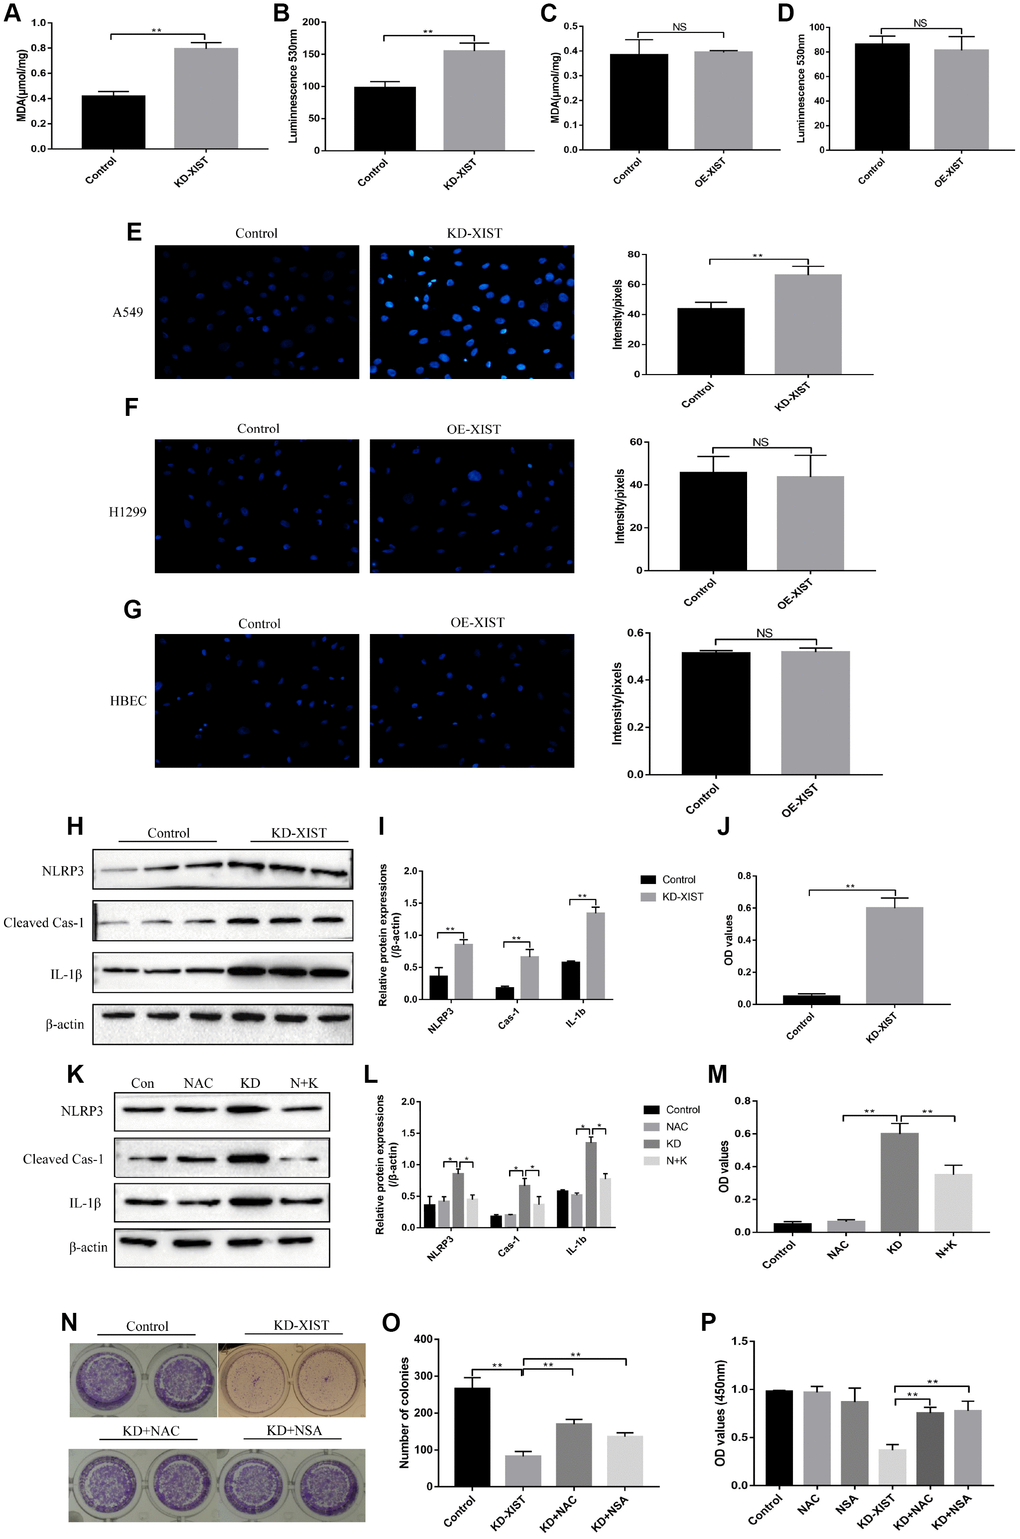 The influences of LncRNA-XIST on oxidative stress and pyroptosis of NSCLC cell lines. MDA levels was detected in (A) A549 cells and (C) H1299 cells. Extracellular NADPH oxidase-derived superoxide was detected in (B) A549 cells and (D) H1299 cells. DHE staining was used to detect ROS levels in (E) A549 cells, (F) H1299 cells and (G) HBE cells. (H, K) Western Blot was used to detect pyroptosis associated proteins (NLRP3, Cleaved Caspase-1 and IL-1β), which was normalized to β-actin and (I, L) quantified by Image J software. (J, M) ELSIA kit was used to detect IL-18 levels in A549 cell supernatants. (N, O) Colony formation assay was performed to detect cell proliferative abilities. (P) CCK-8 assay was used to detect A549 cell proliferation. “NAC” means N-acetyl cysteine treatment. “KD” means knock-down of LncRNA-XIST. “N+K” means NAC treatment plus knocking down LncRNA-XIST. (“NS” represented no statistical significance, “*” represented p p 